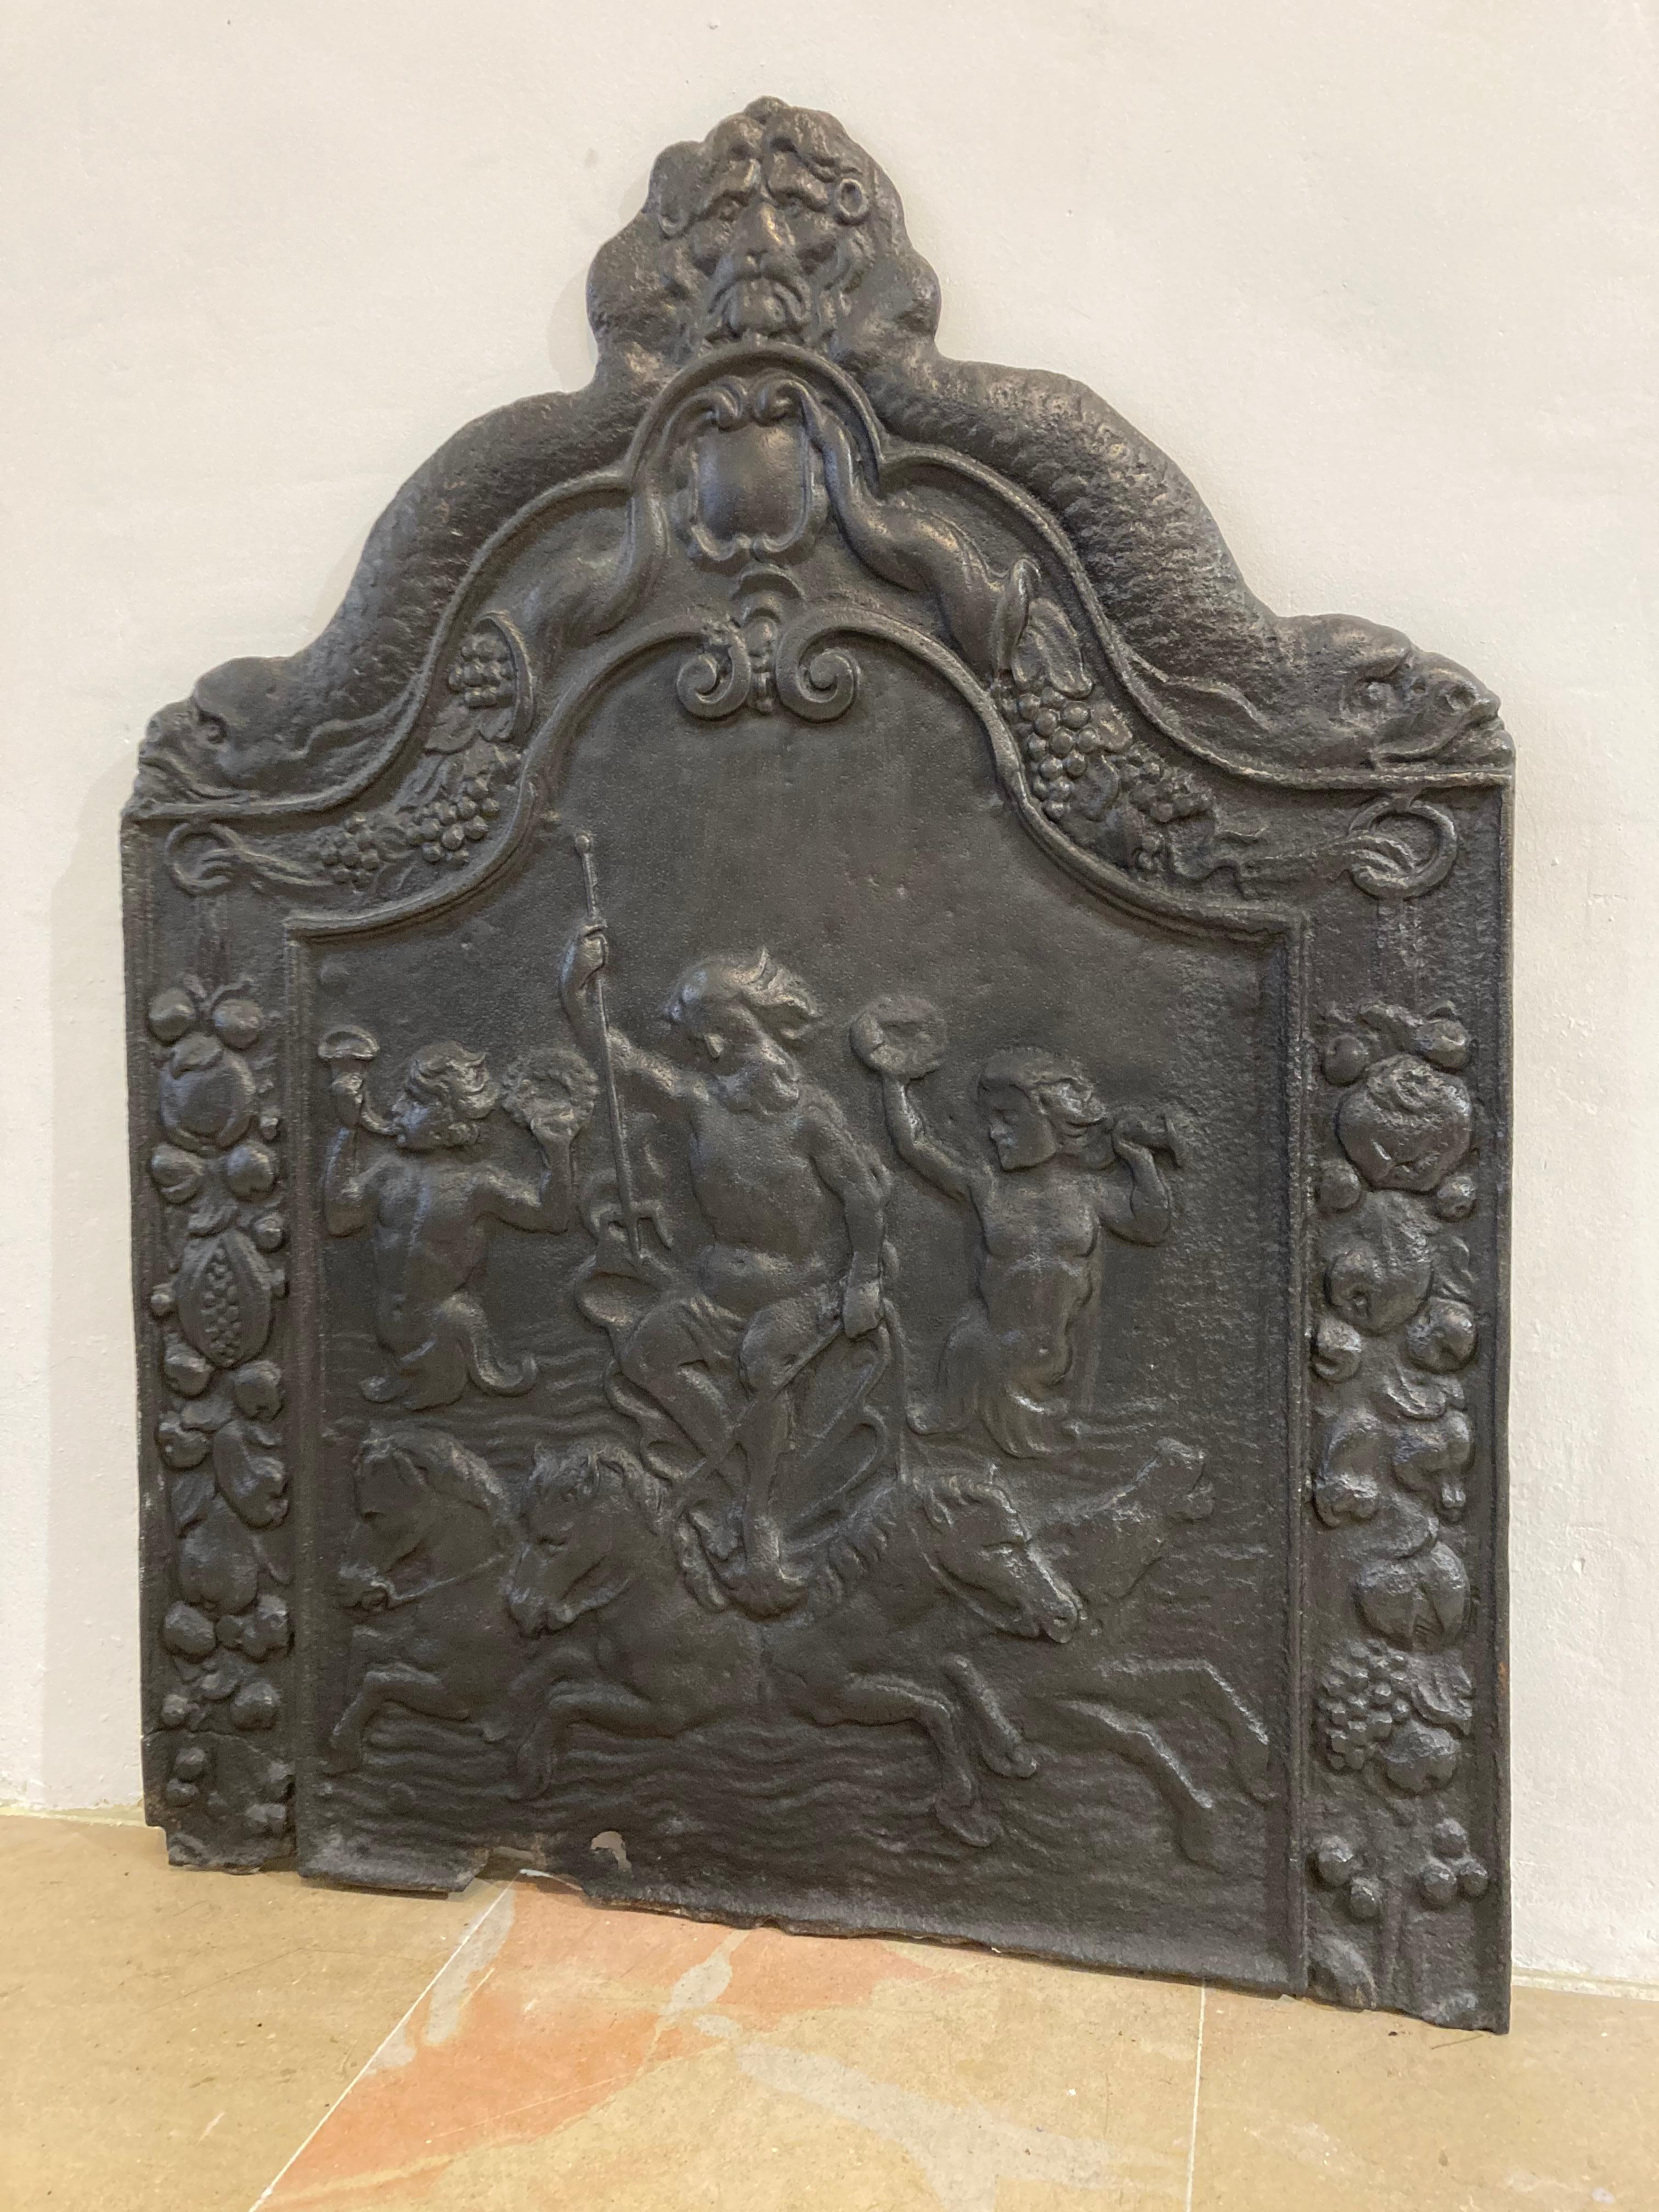 Lovely tall and decorative fireback with a depiction of Poseidon holding trident, the sea, four horses and cherubs holding trumpet.

Bottom is rough and has a repair, overall great looking and impressive piece.